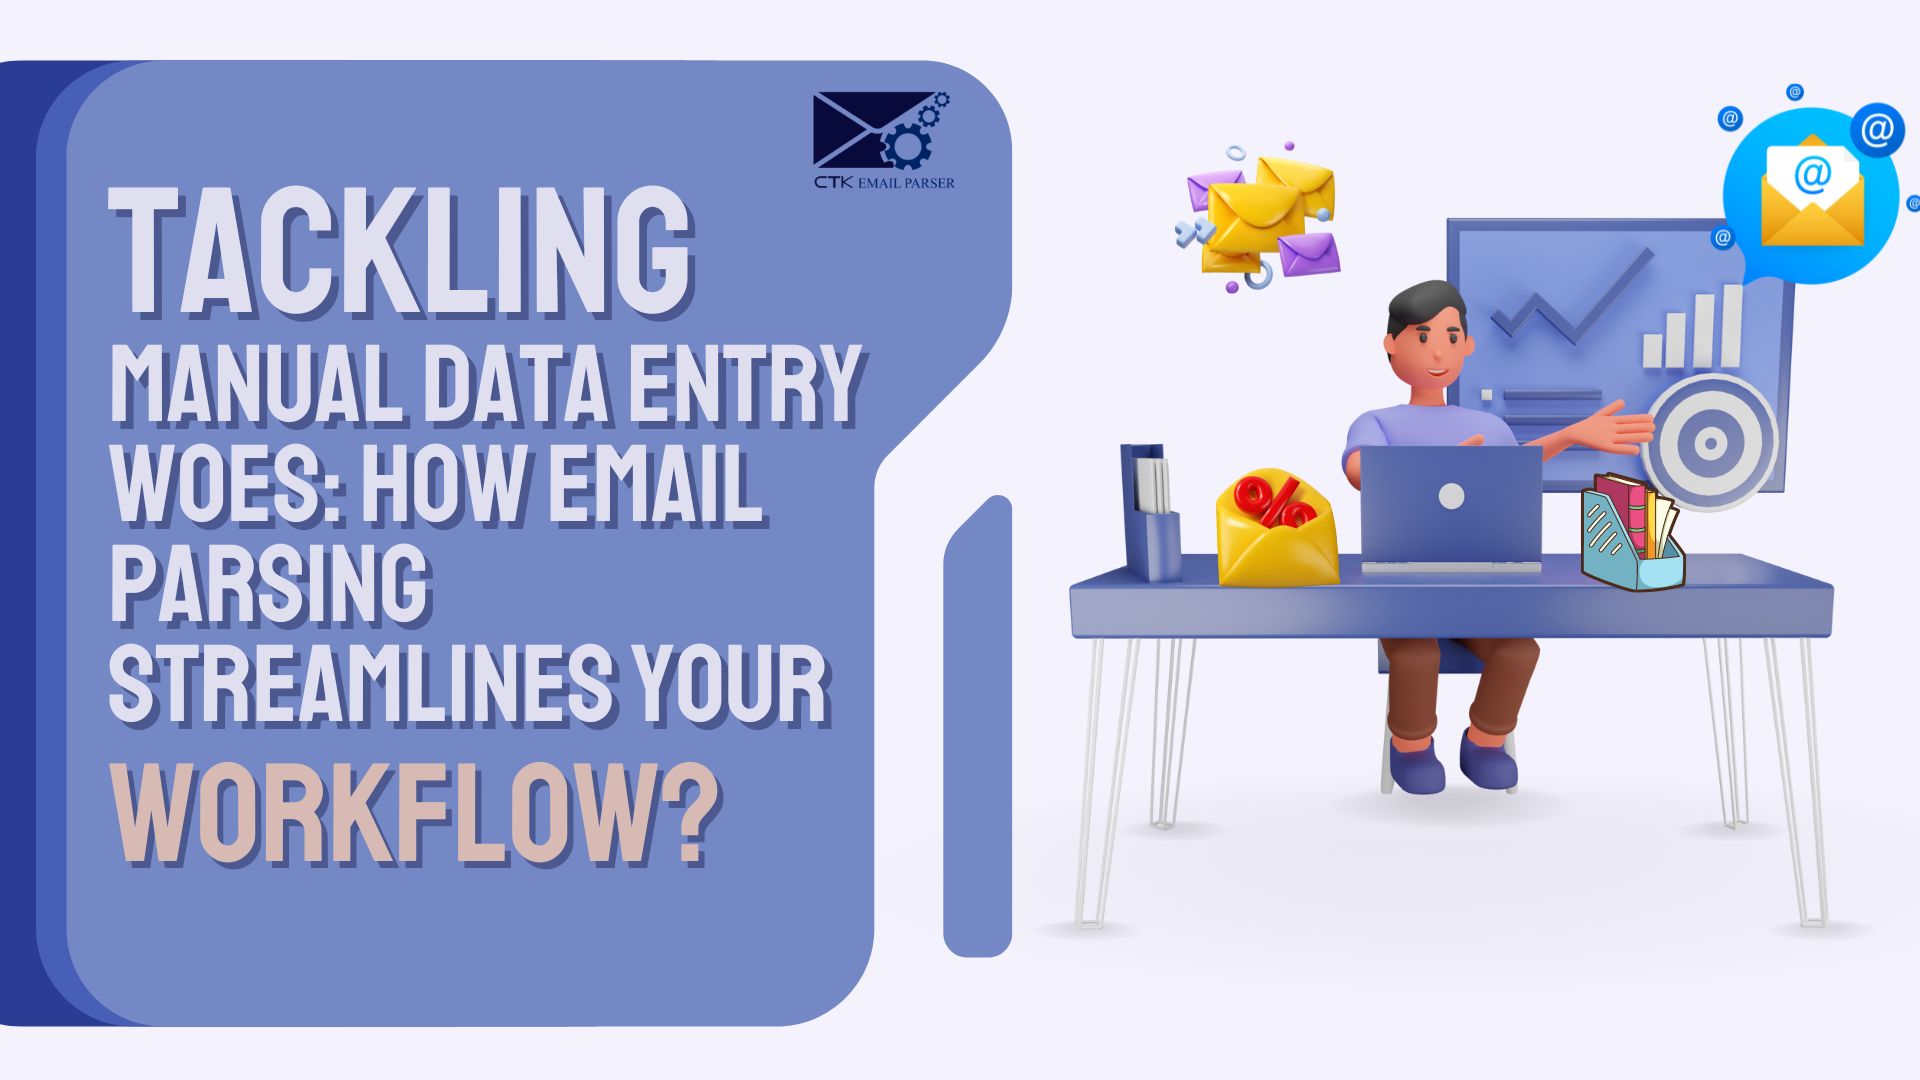 How Email Parsing Streamlines Your Workflow?